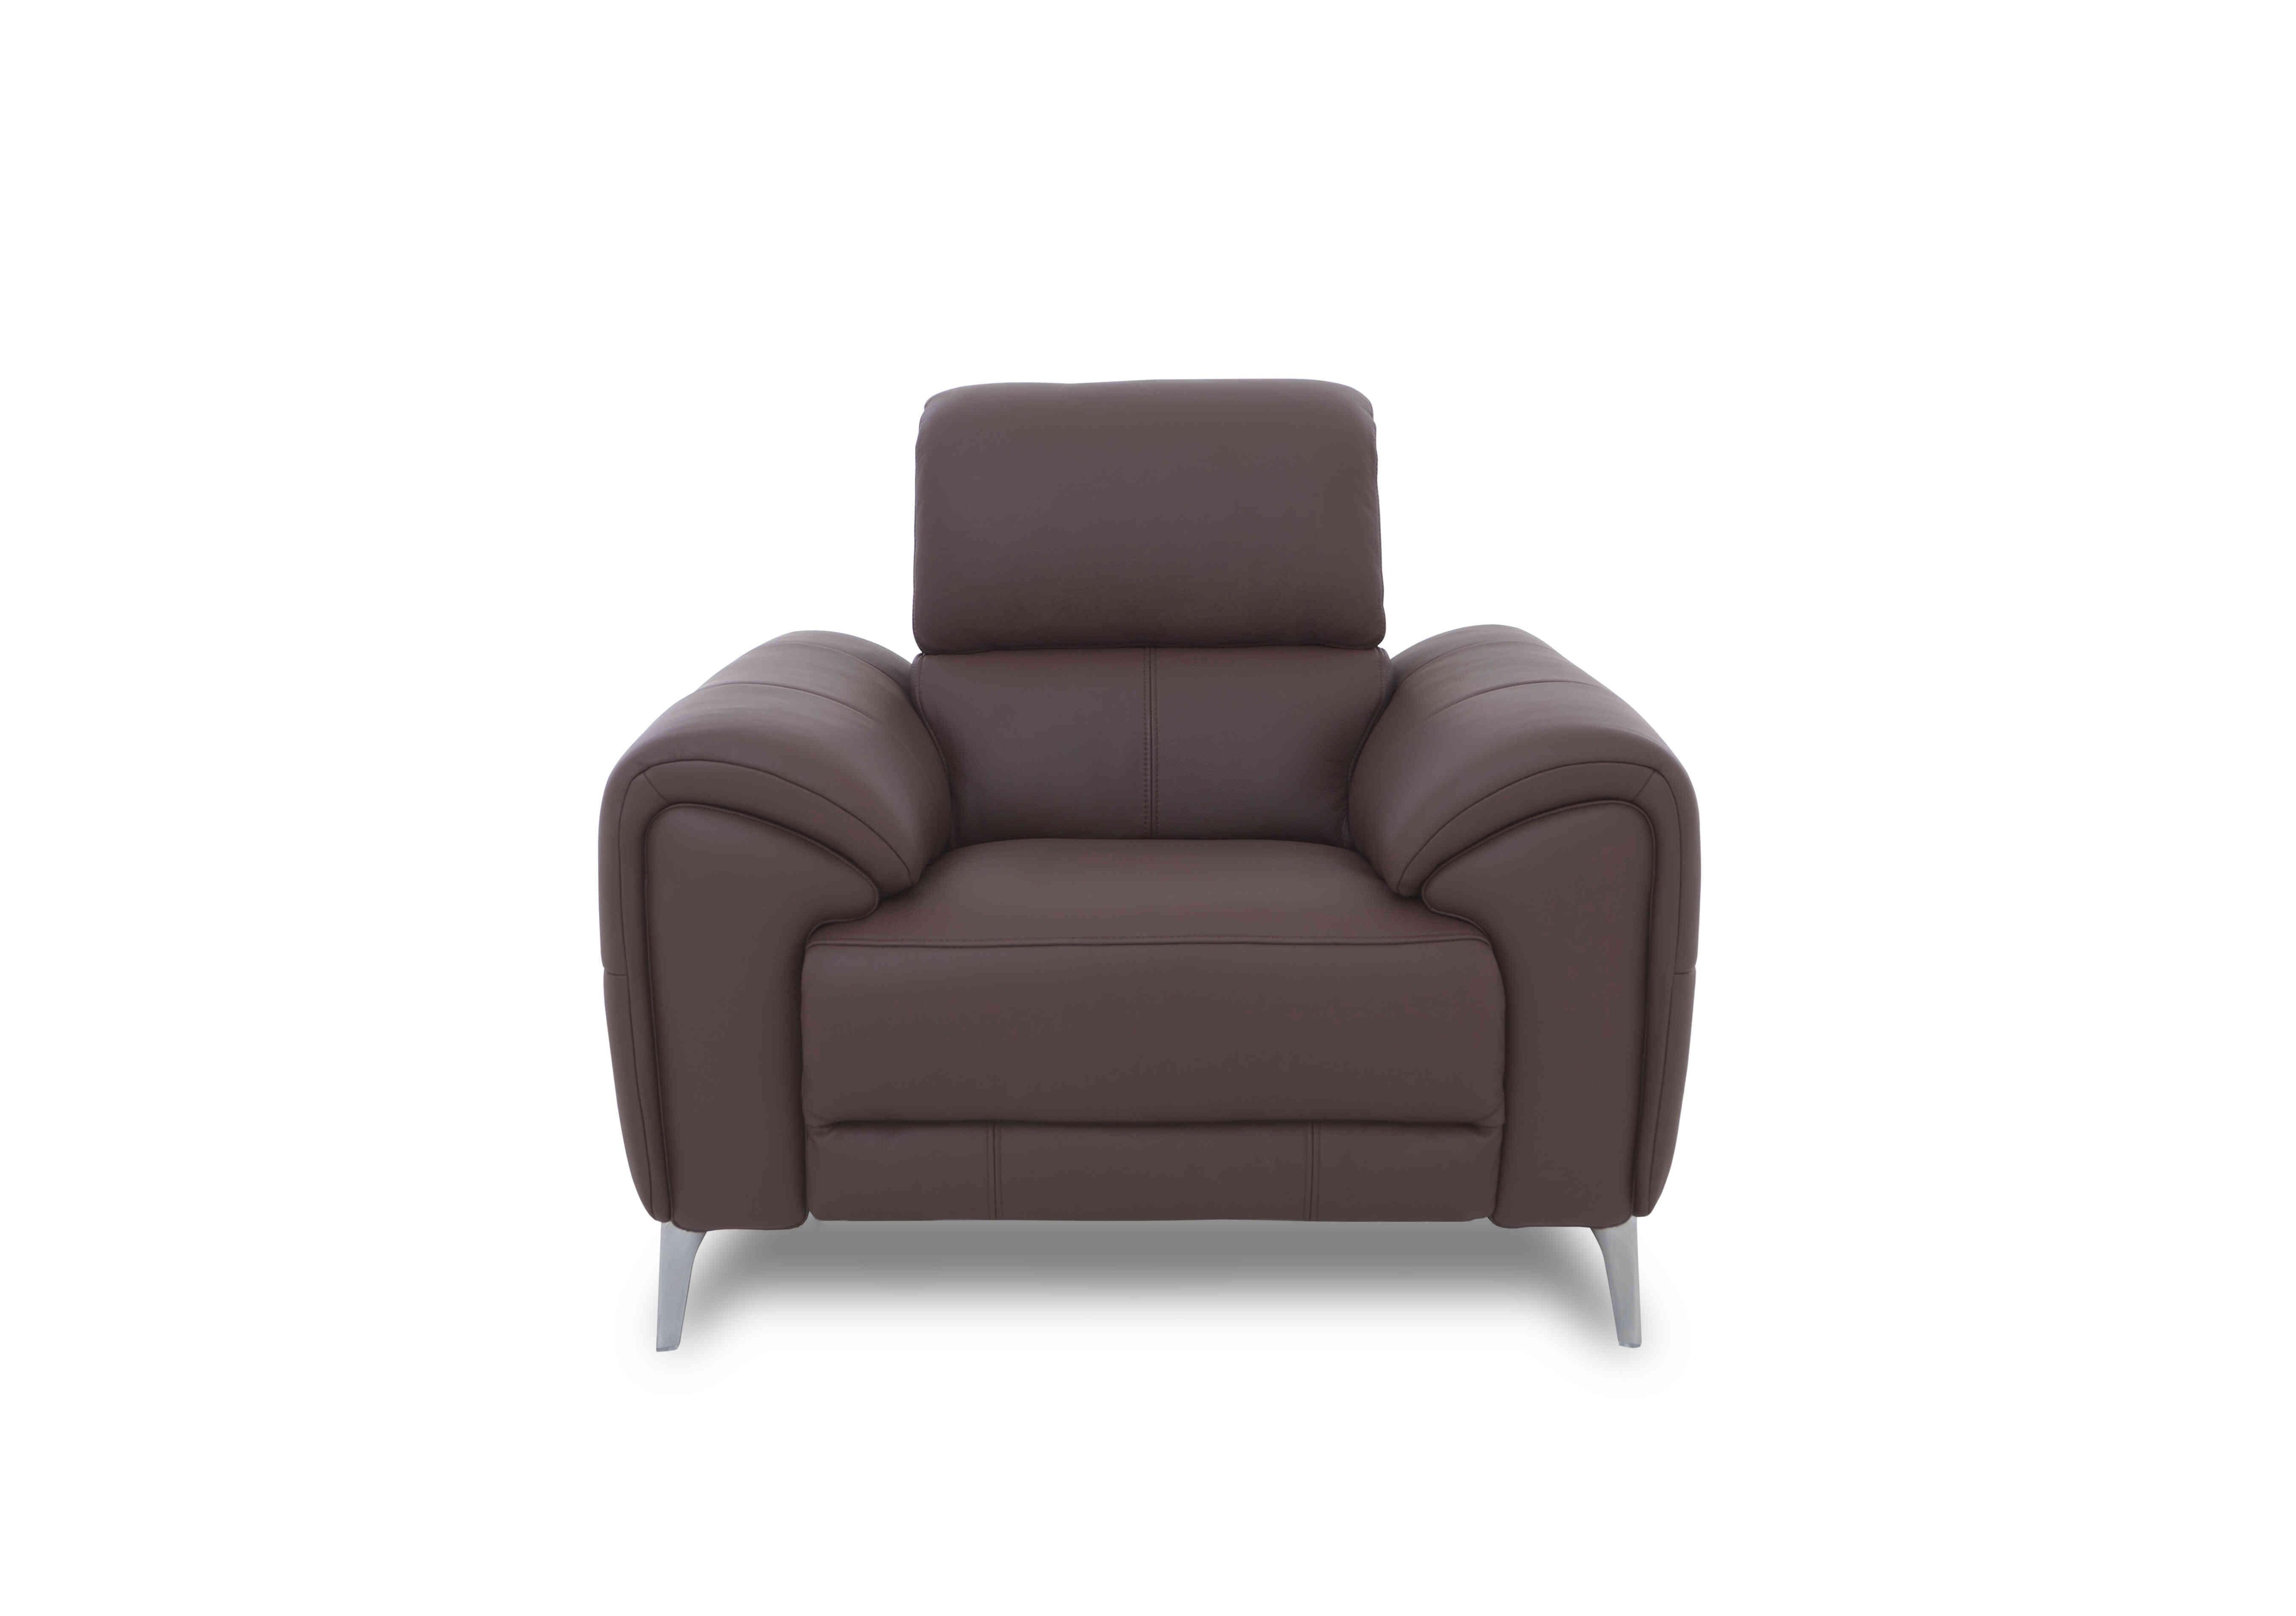 Vino Leather Power Recliner Chair with Power Headrest and Heated Seat in Cat-40/30 Oslo Mulberry on Furniture Village